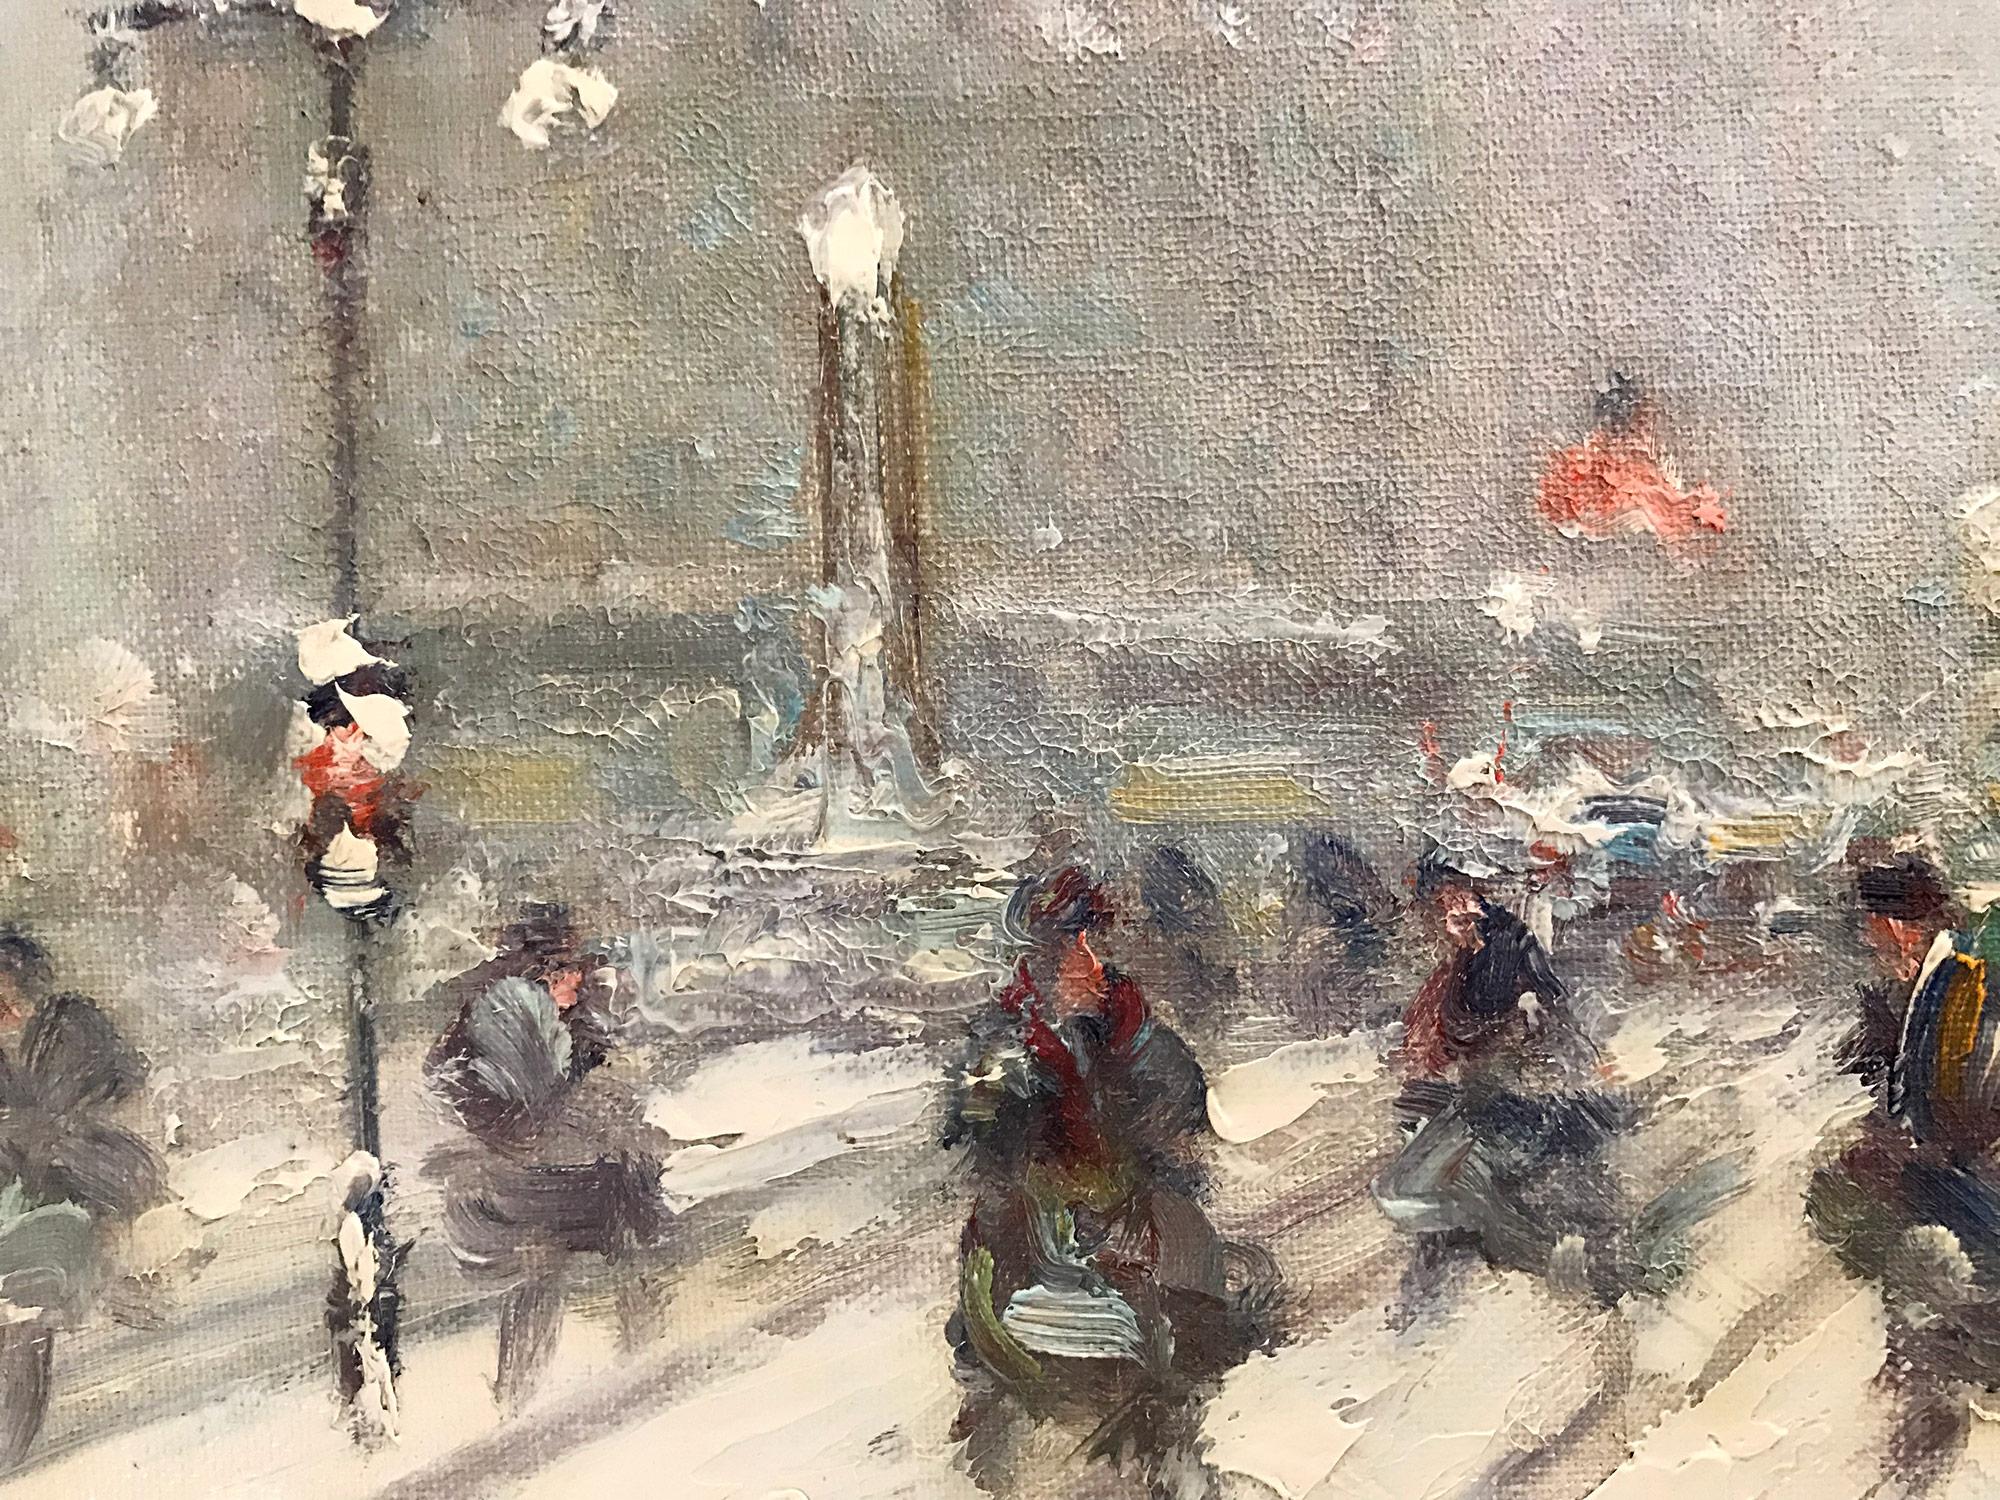 A truly stunning jewel and pertinent example of Berthelsen's charming New York City winter scenes depicting Madison Square Park on 5th Avenue and 23rd Street. An iconic scene that so many have come to love and cherish. The artist was truly a master